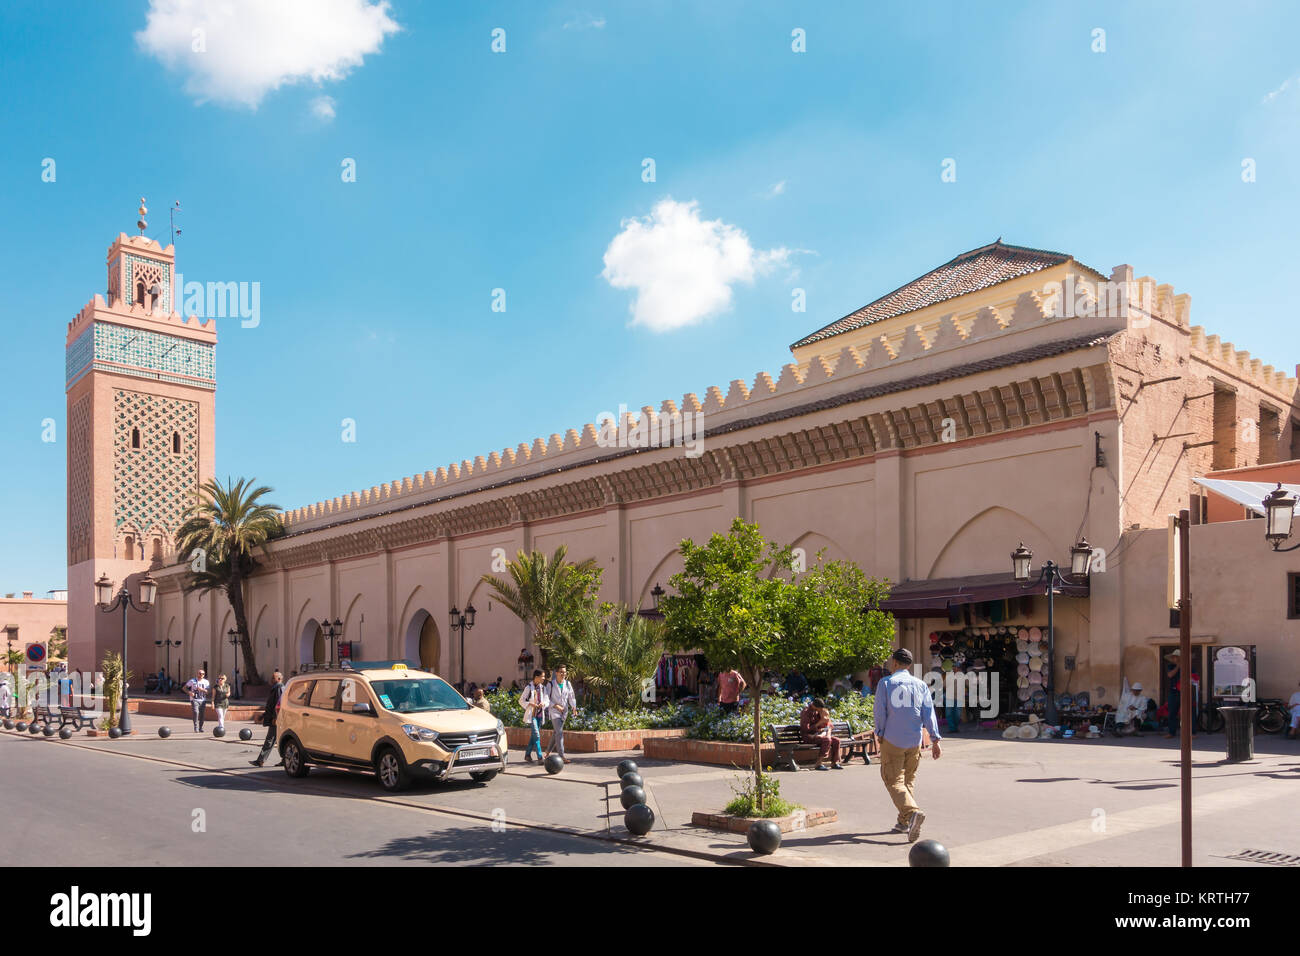 Marrakech, Morocco. 12th May, 2017: Shop owners and a taxi are waiting for customers while people are walking past the Moulay El Yazid Mosque in Marra Stock Photo